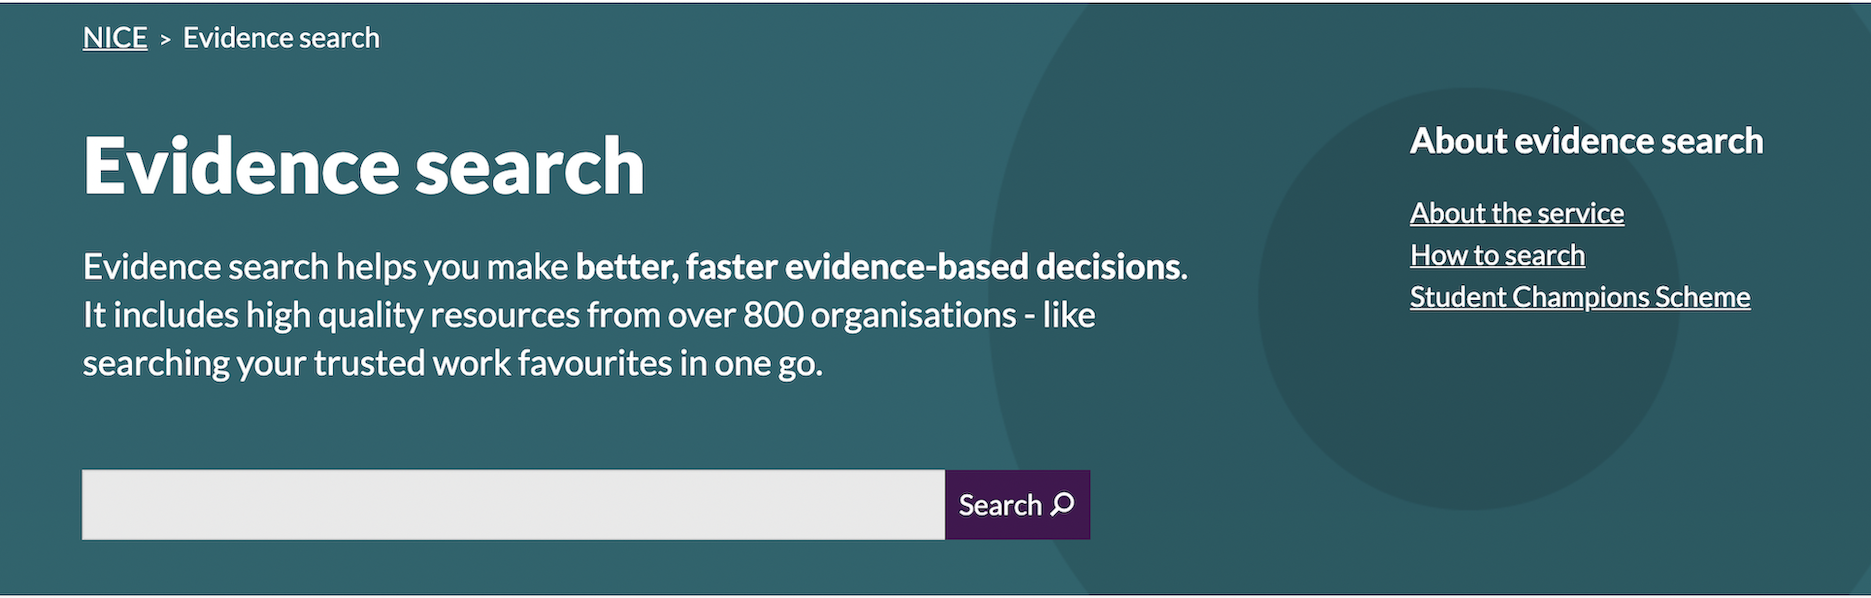 screenshot of the search bar on evidence.nhs.uk